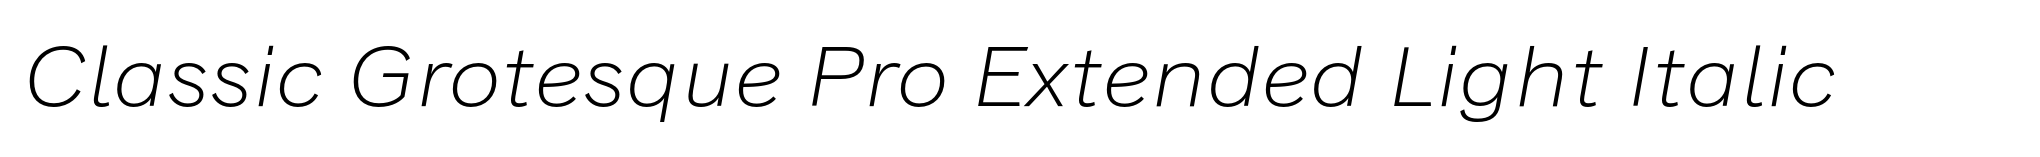 Classic Grotesque Pro Extended Light Italic image